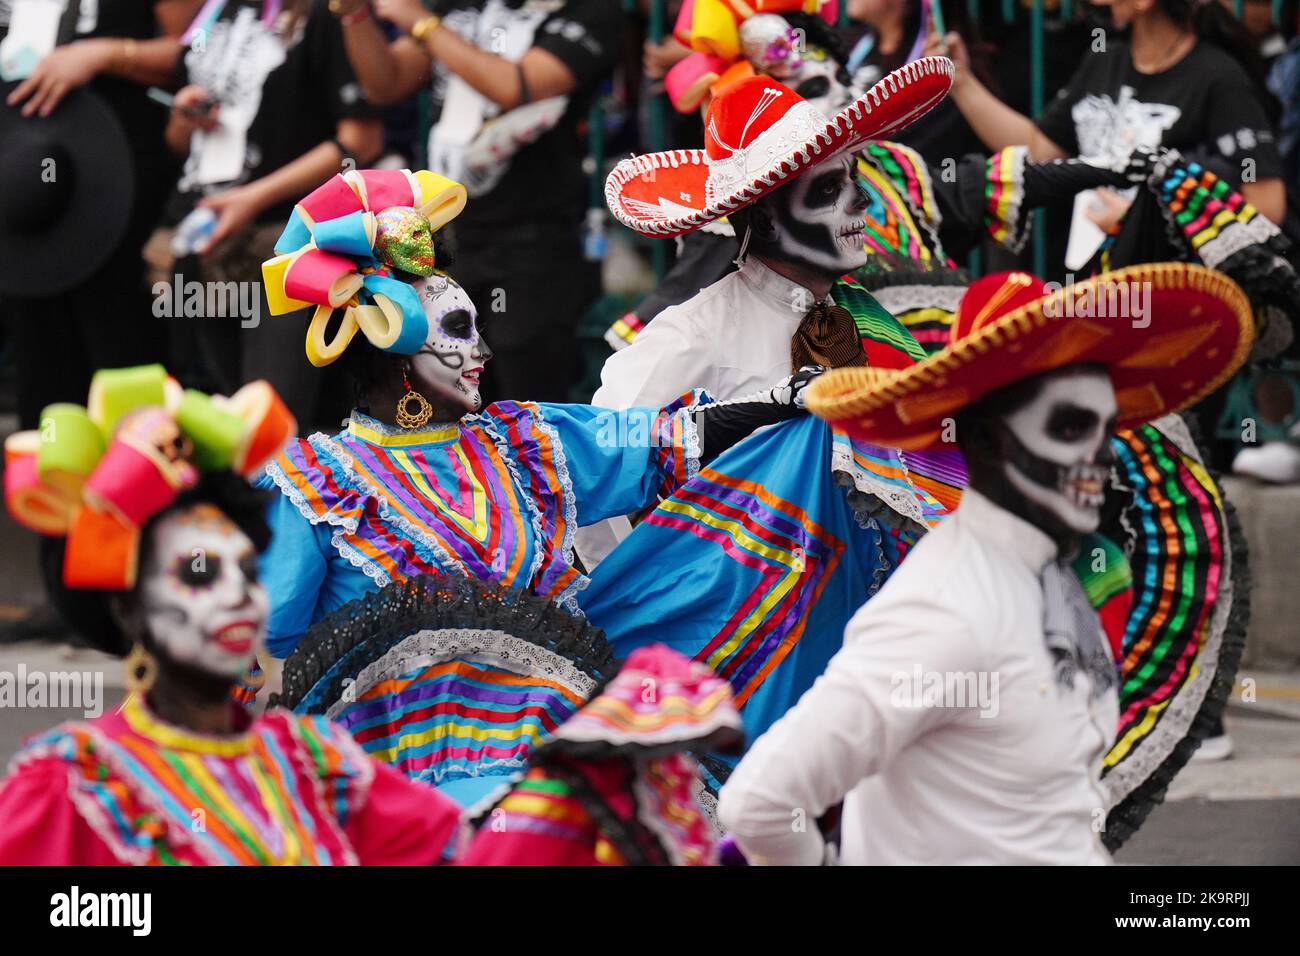 Mexico City, Mexico. 29th Oct, 2022. Performers wearing traditional Mexican costumes and skeleton face paint dance down the street during the Grand Parade of the Dead to celebrate Dia de los Muertos holiday on Paseo de la Reforma, October 29, 2022 in Mexico City, Mexico. Credit: Richard Ellis/Richard Ellis/Alamy Live News Stock Photo